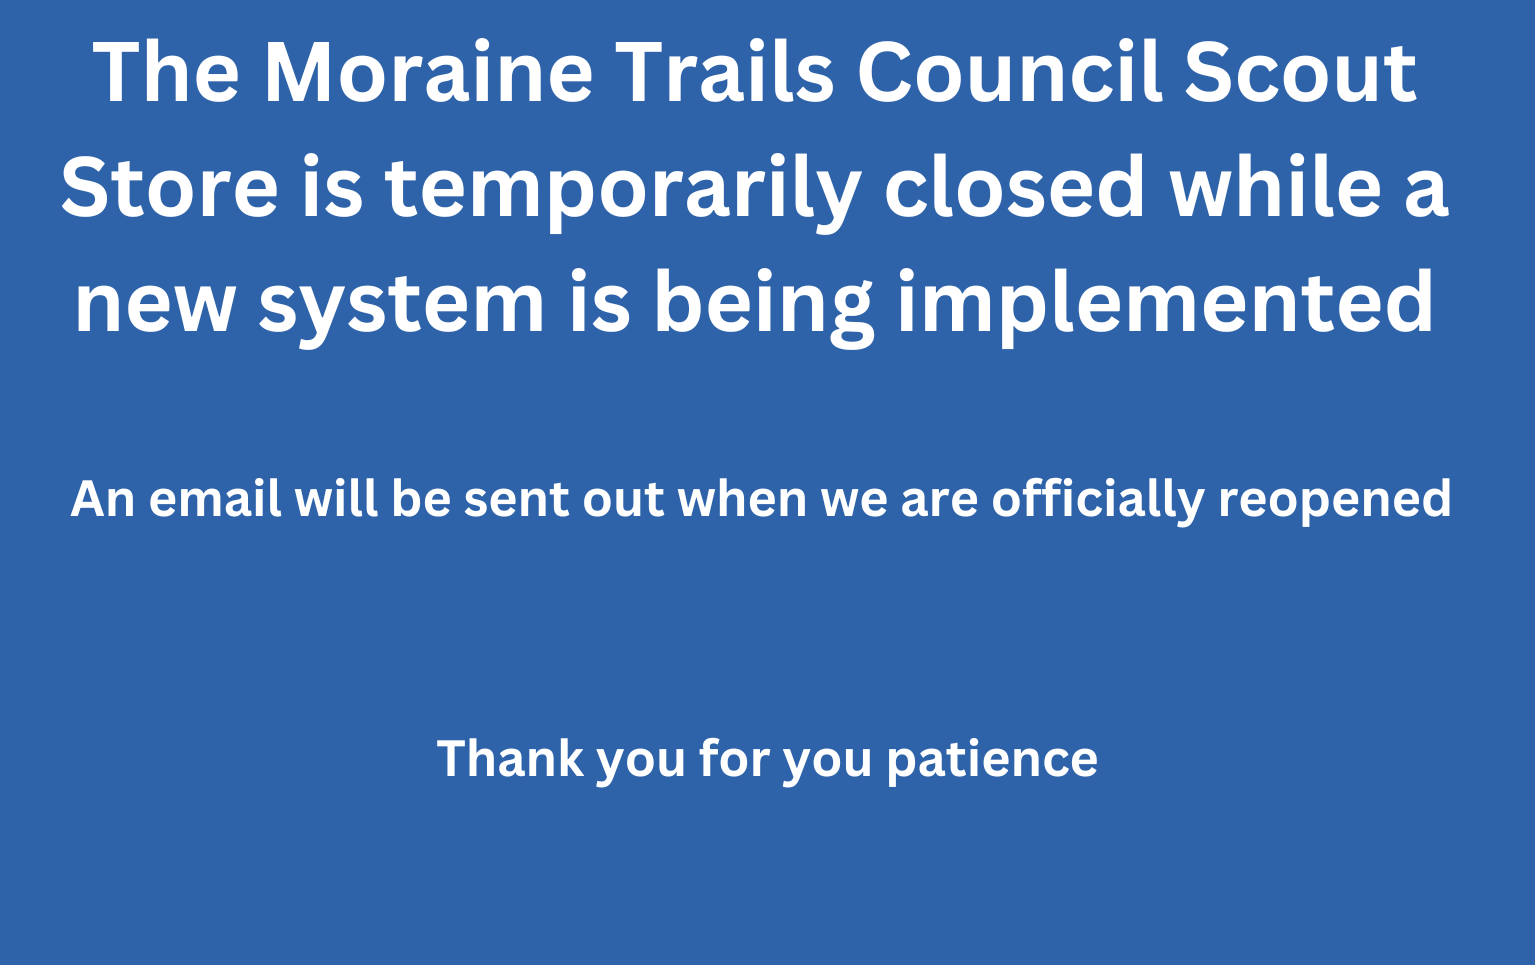 The Moraine Trails Council Scout Store will be open again (2)